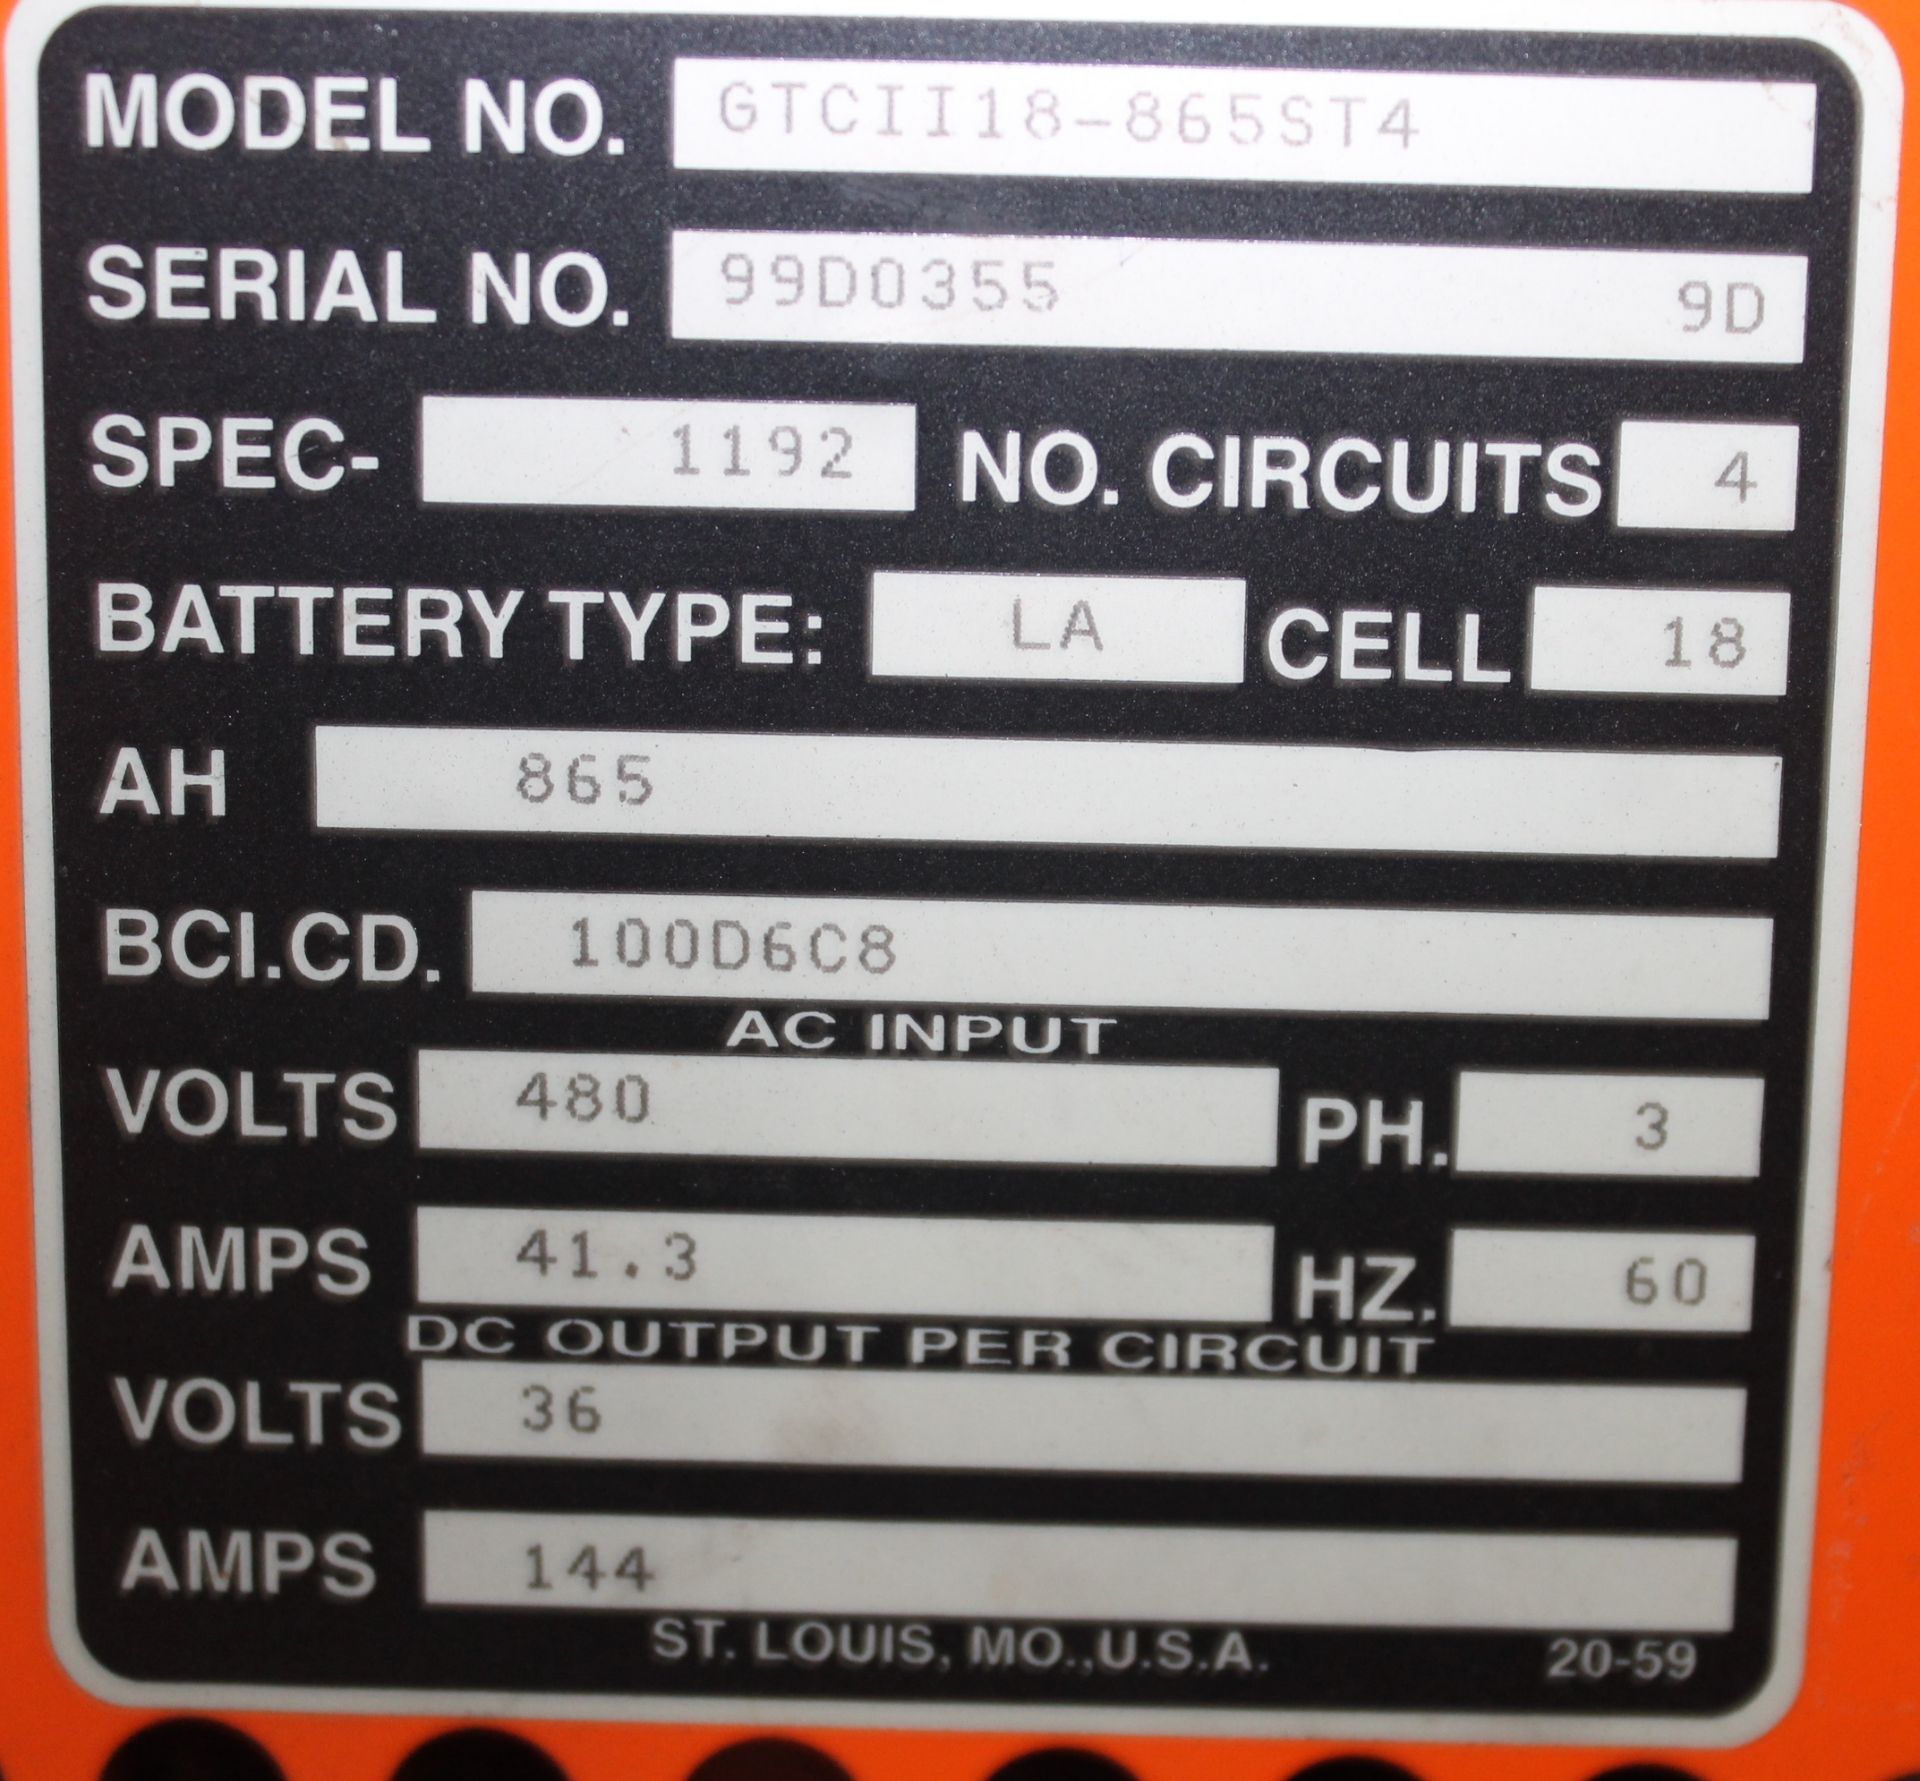 GNB 4 STATIONS 36 VOLTS BATTERY CHARGER, MODEL: GTCII18-865ST4, CHARGES 4 BATTERIES AT SAME TIME, - Image 5 of 5